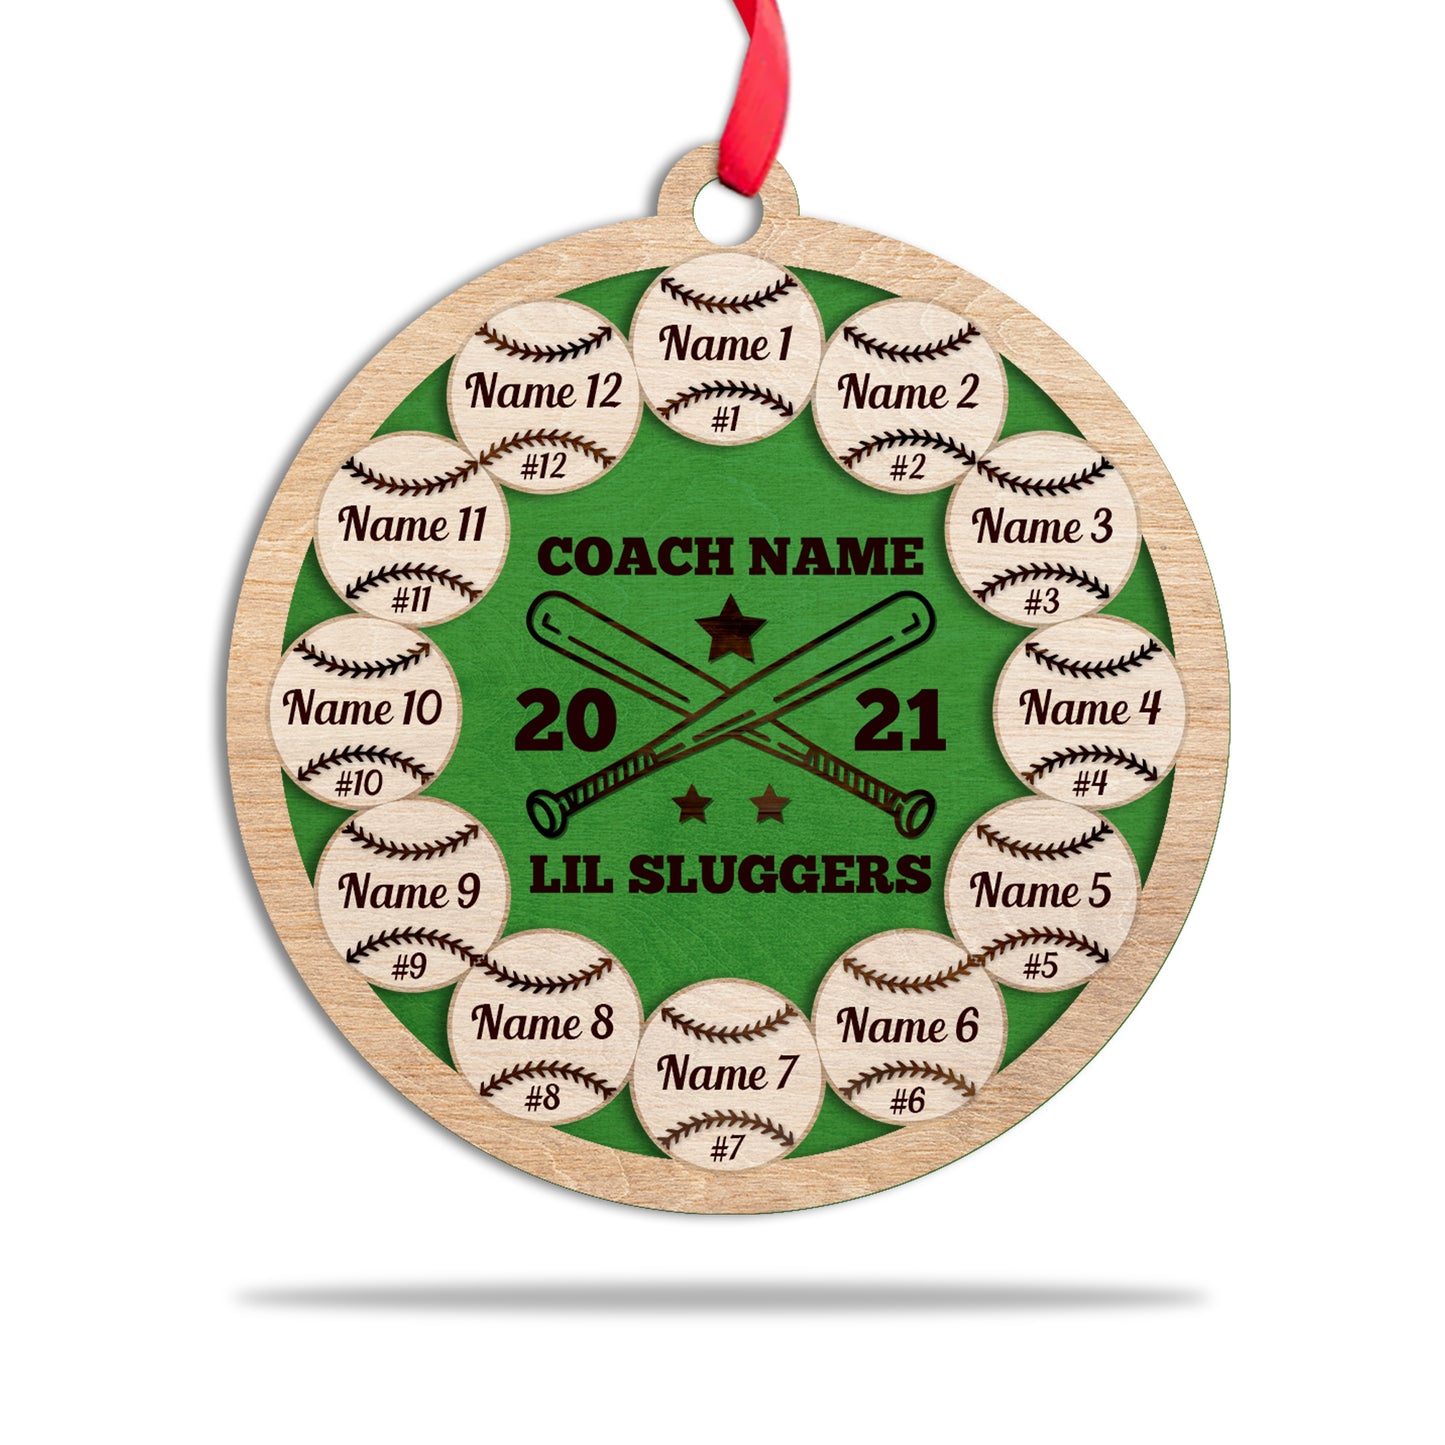 Baseball Team - Personalized 2 Layered Wooden Ornament - Christmas Gift For Coaches, Baseball Players